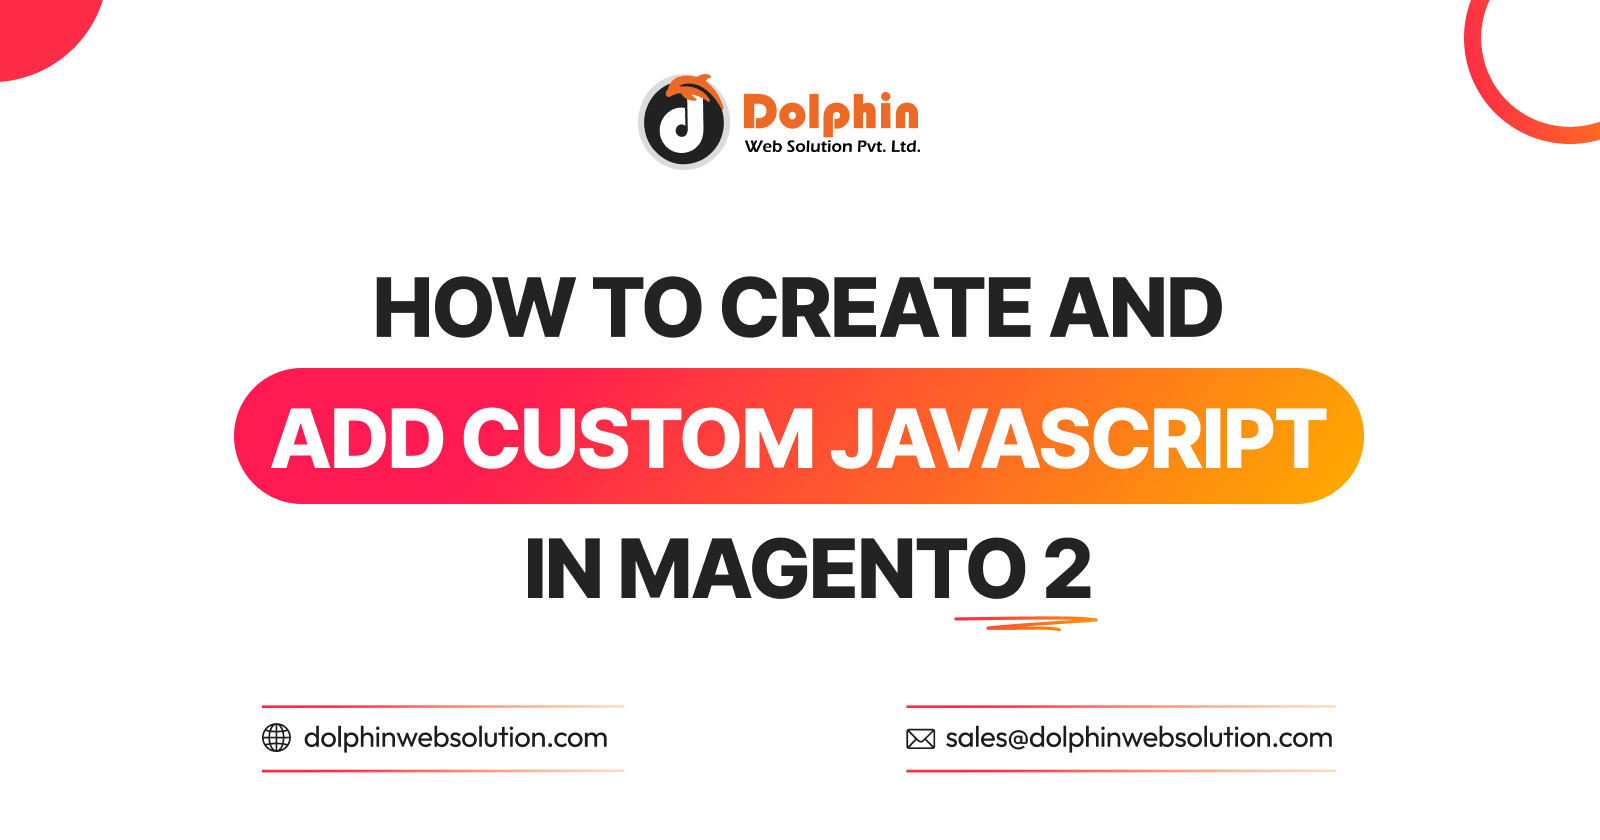 How To Create and Add Custom Javascript In Magento 2